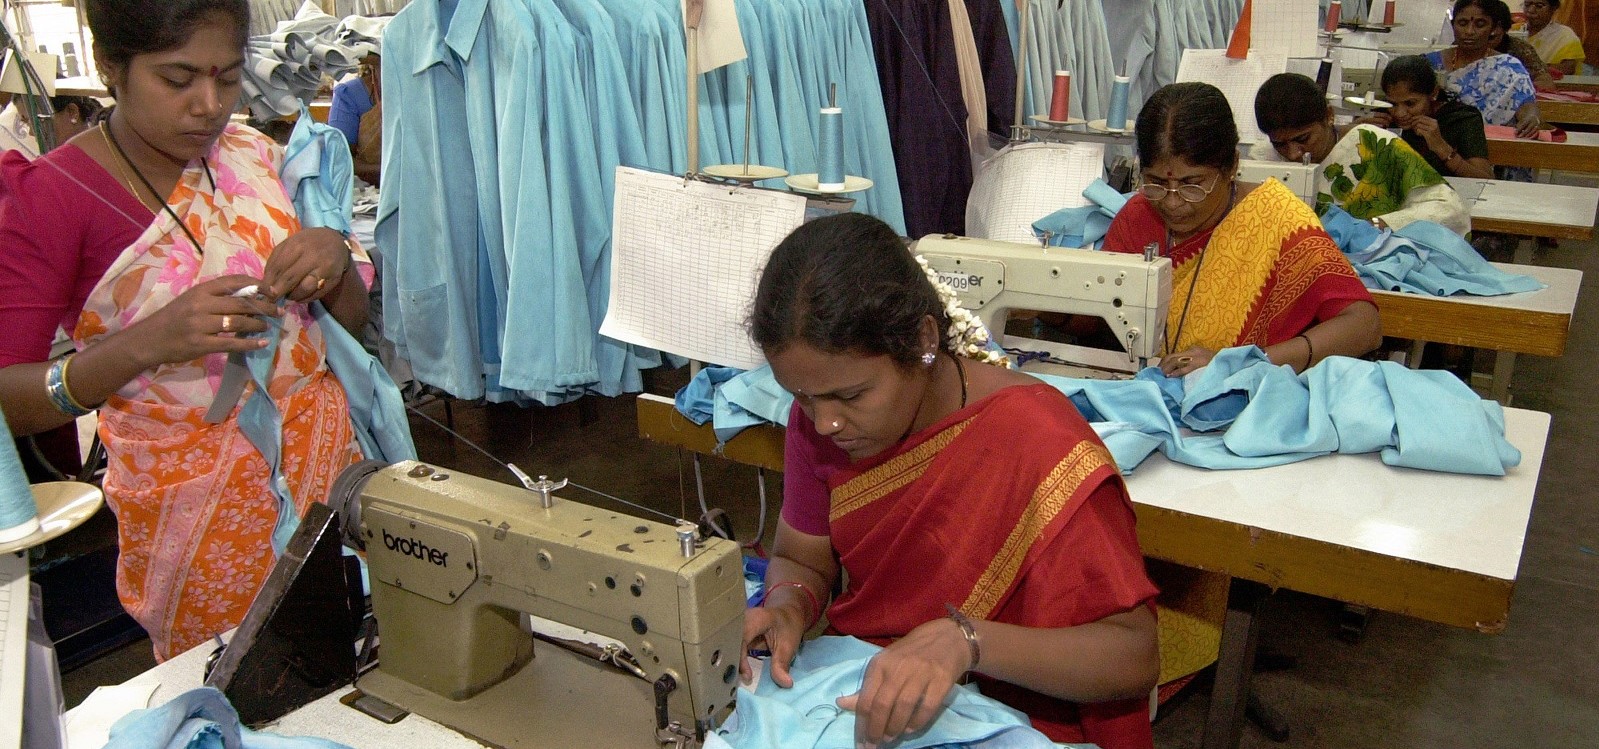 Women working at white tables working with blue fabric to make garments